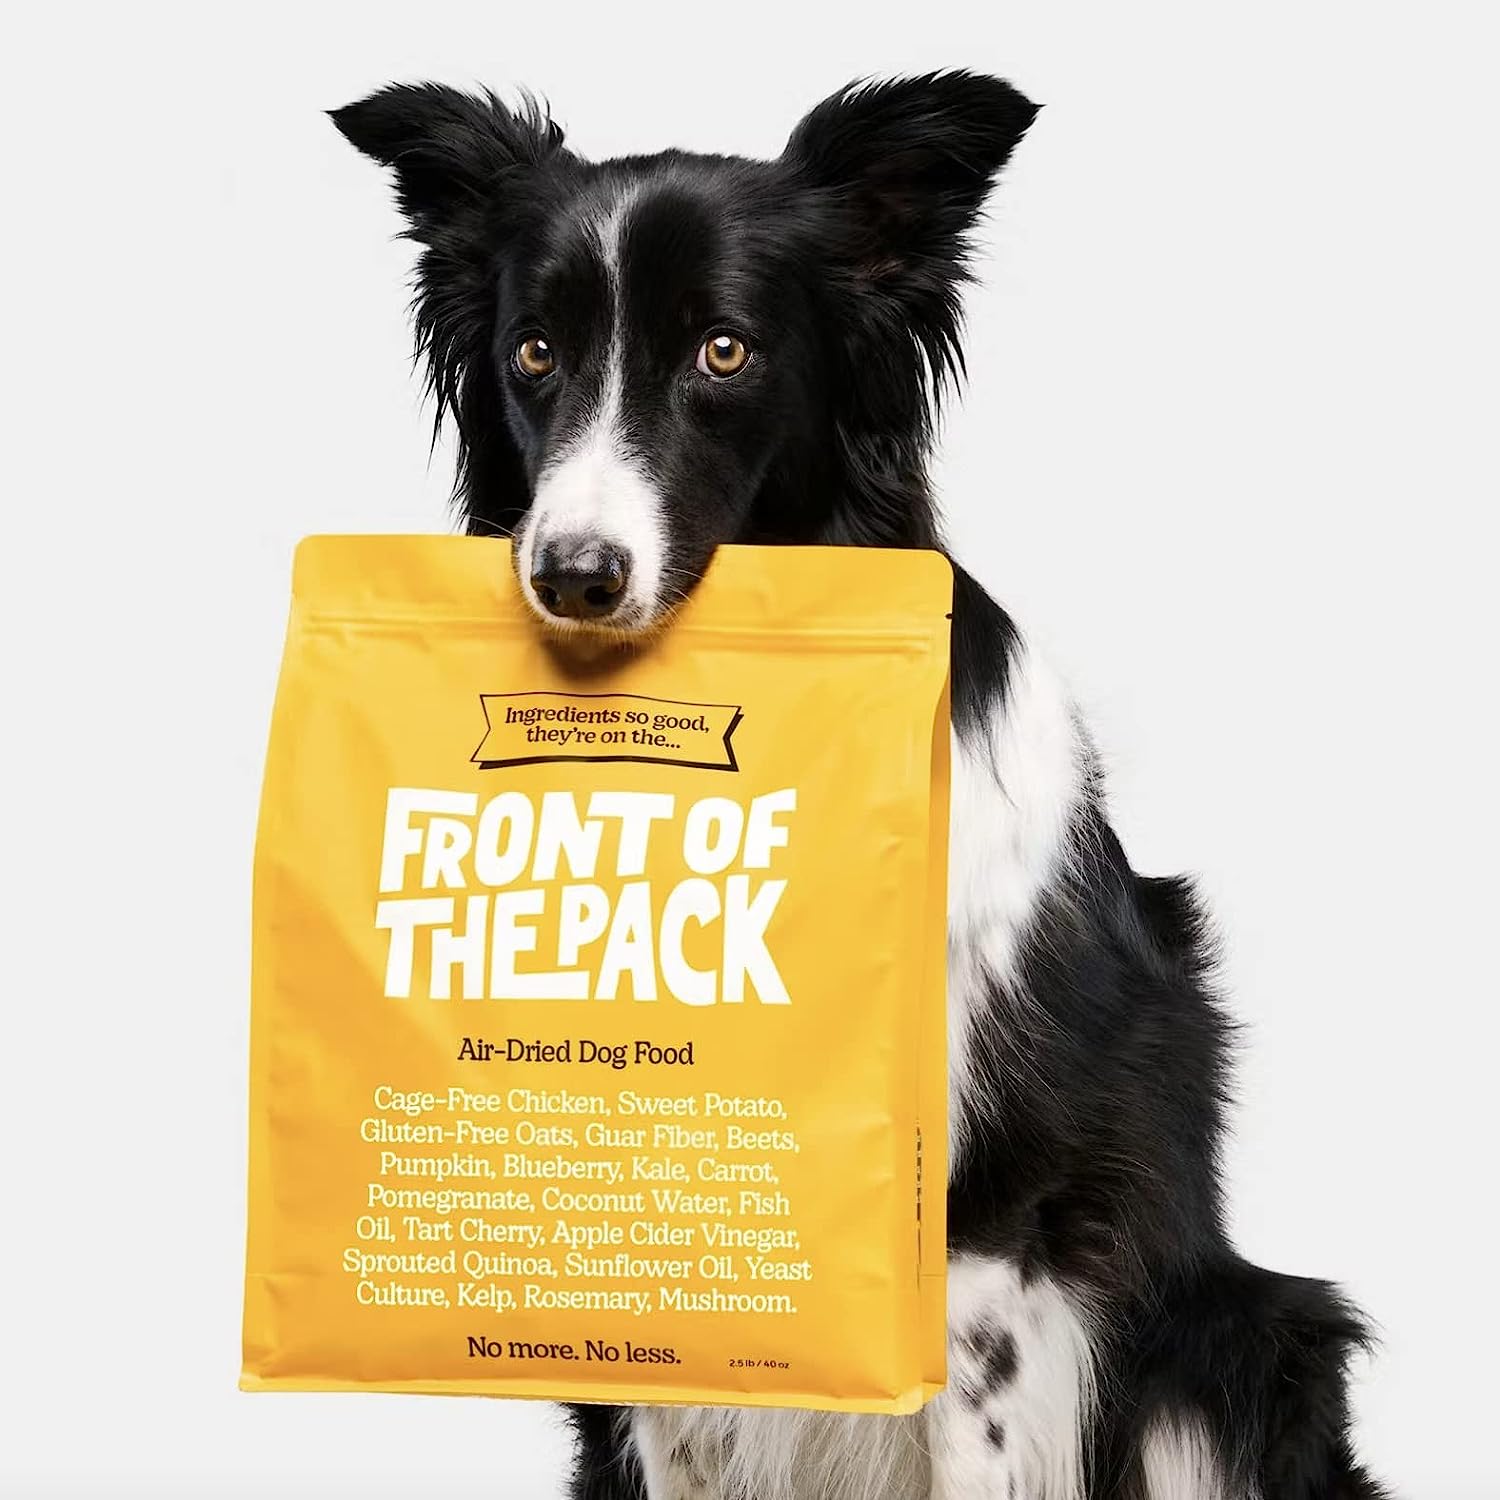 Front of the Pack Free Range Chicken Air-Dried Dog Food